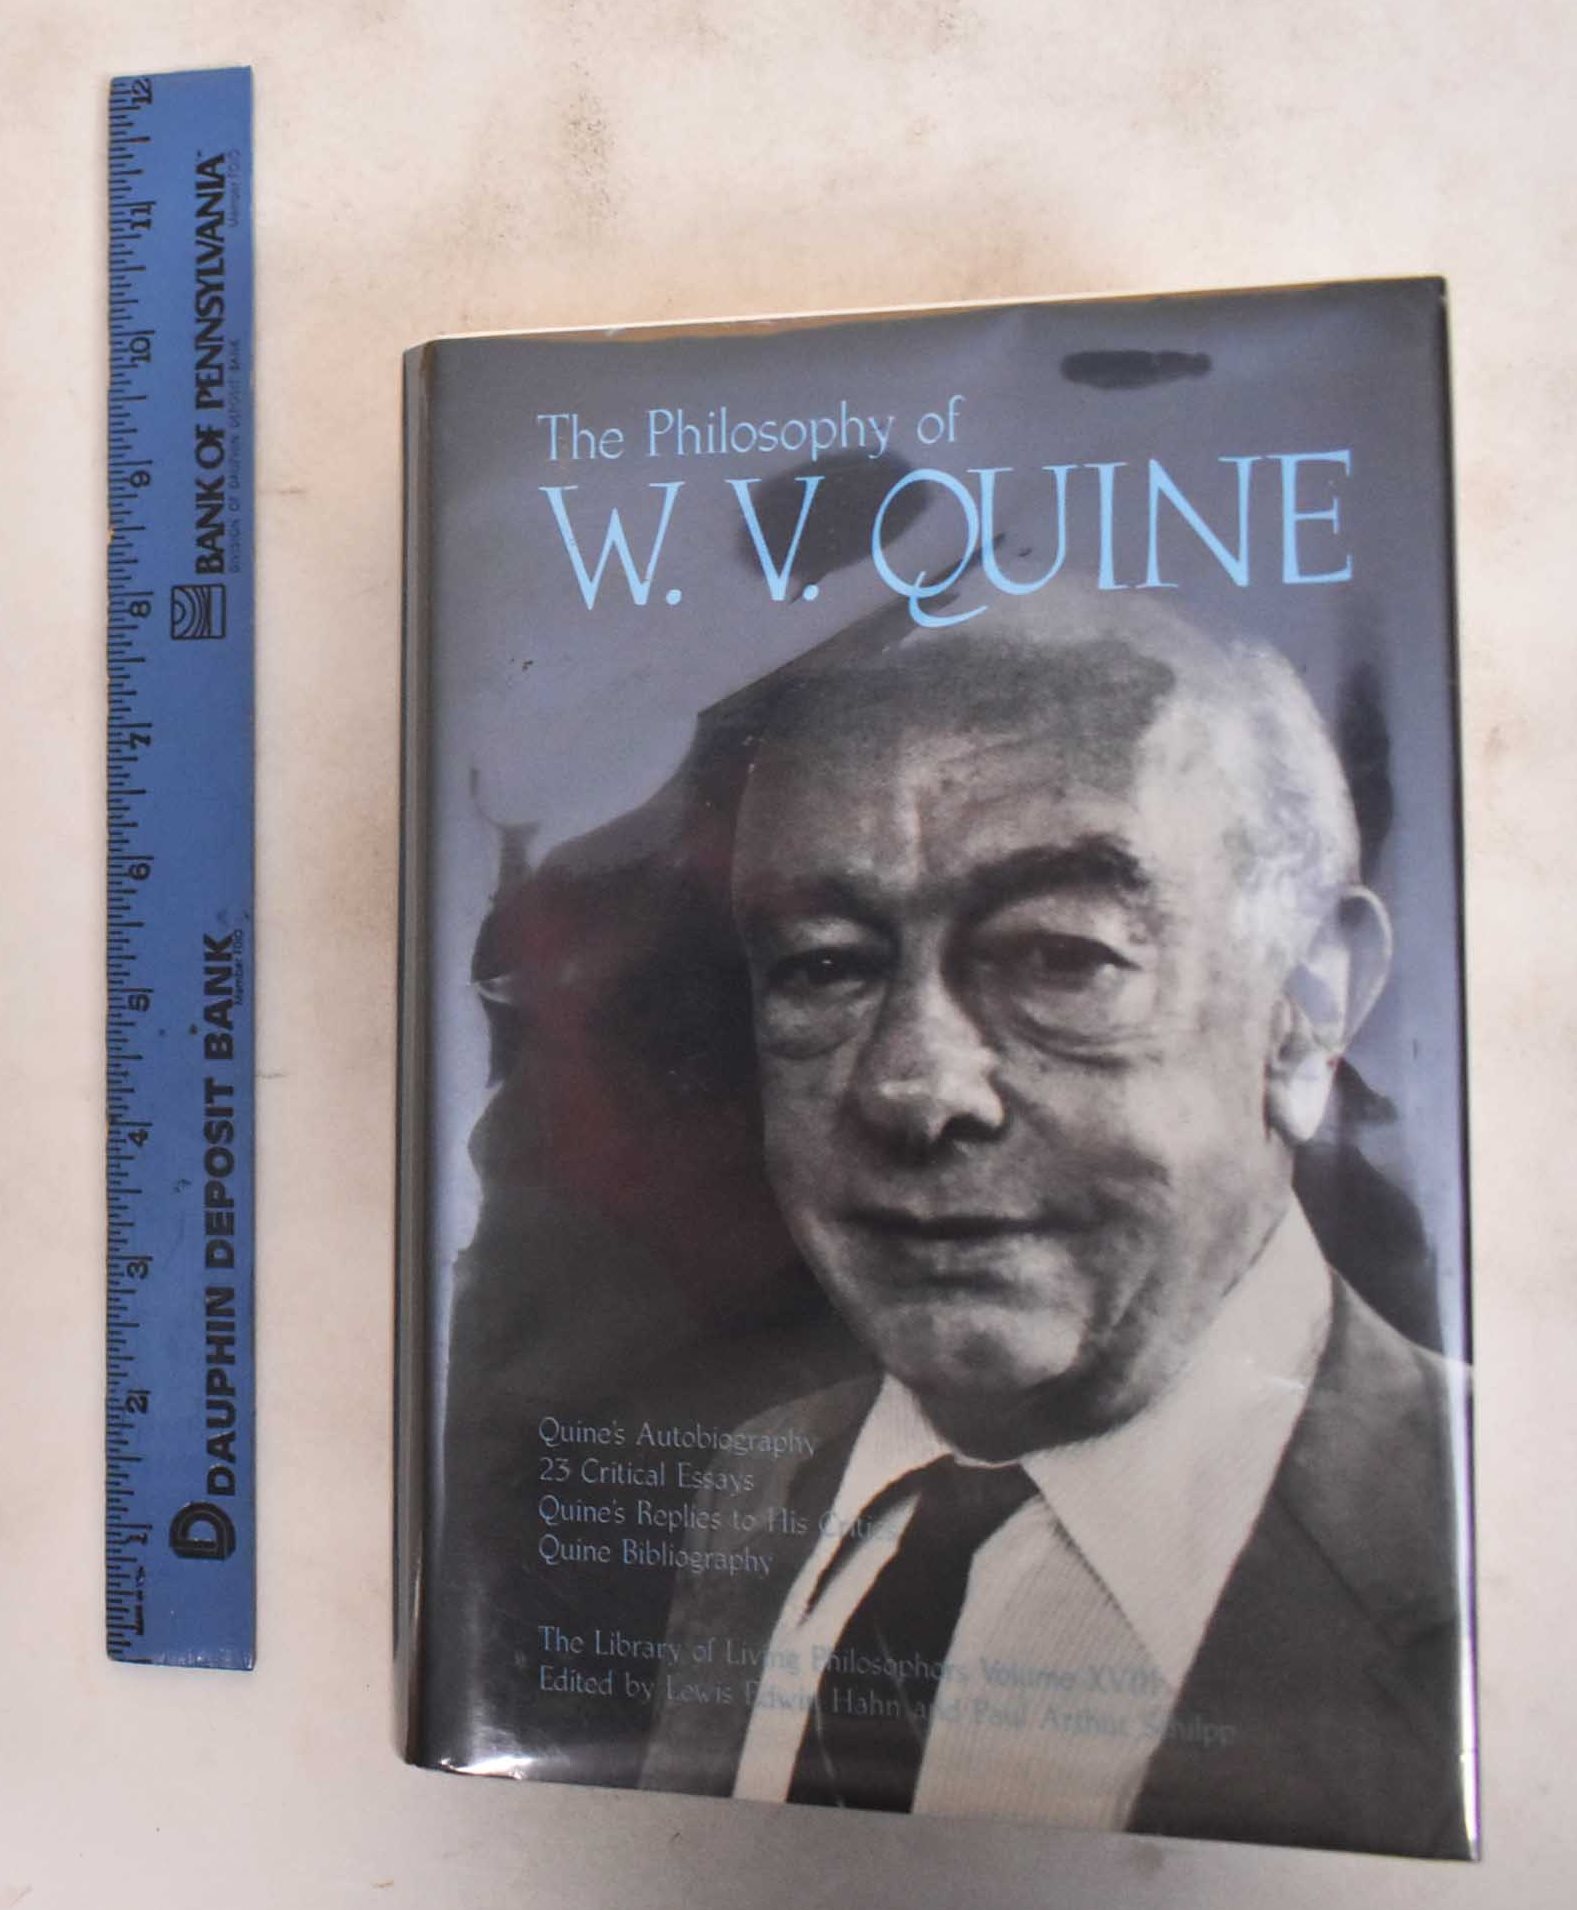 The Philosophy of W.V. Quine - Quine, W.V. and Lewis Edwin Hahn and Paul Arthur Schilpp